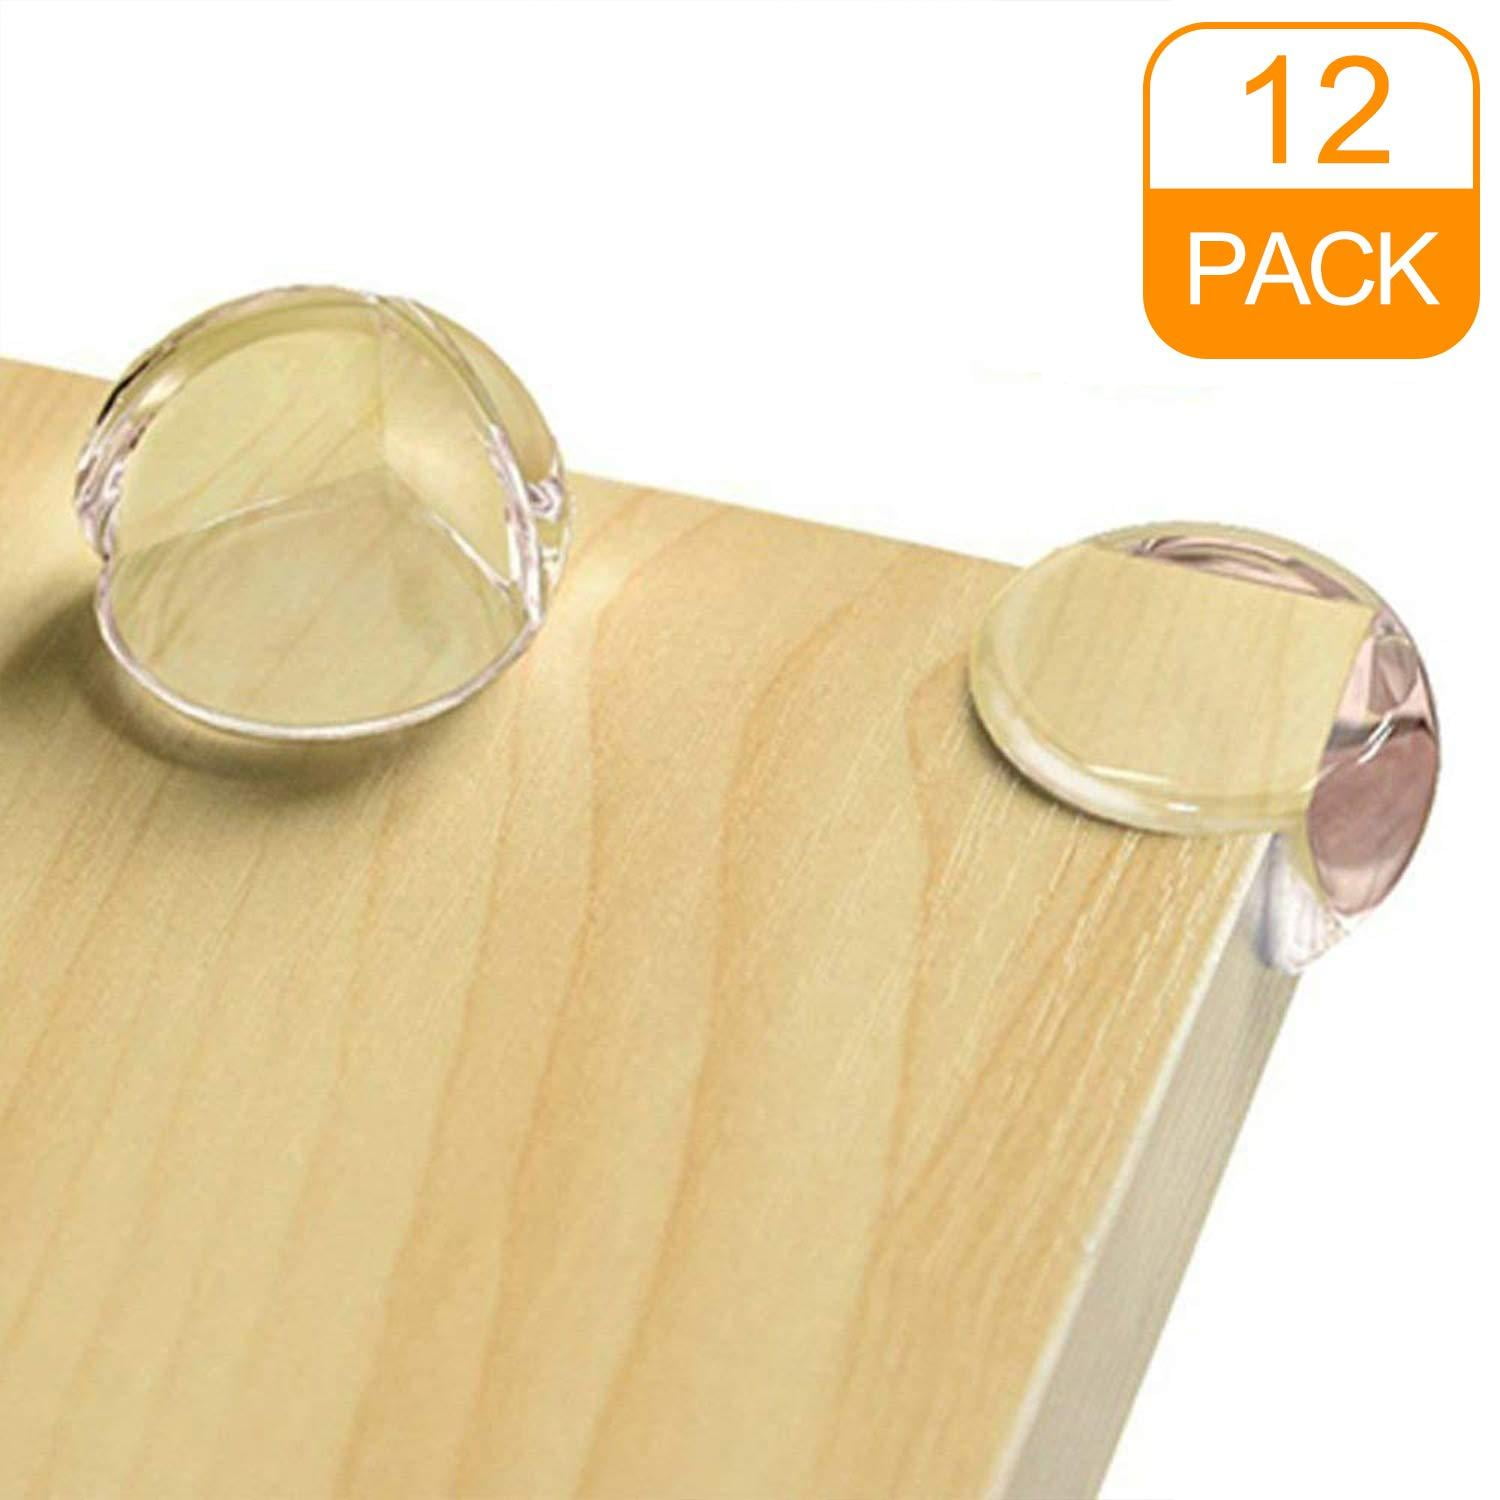 Corner Protector Clear Corner Edge Protector for Baby Safety Soft Table Corner Guards Bumpers for Furniture 12 Pack Baby Proofing Corner Guards 